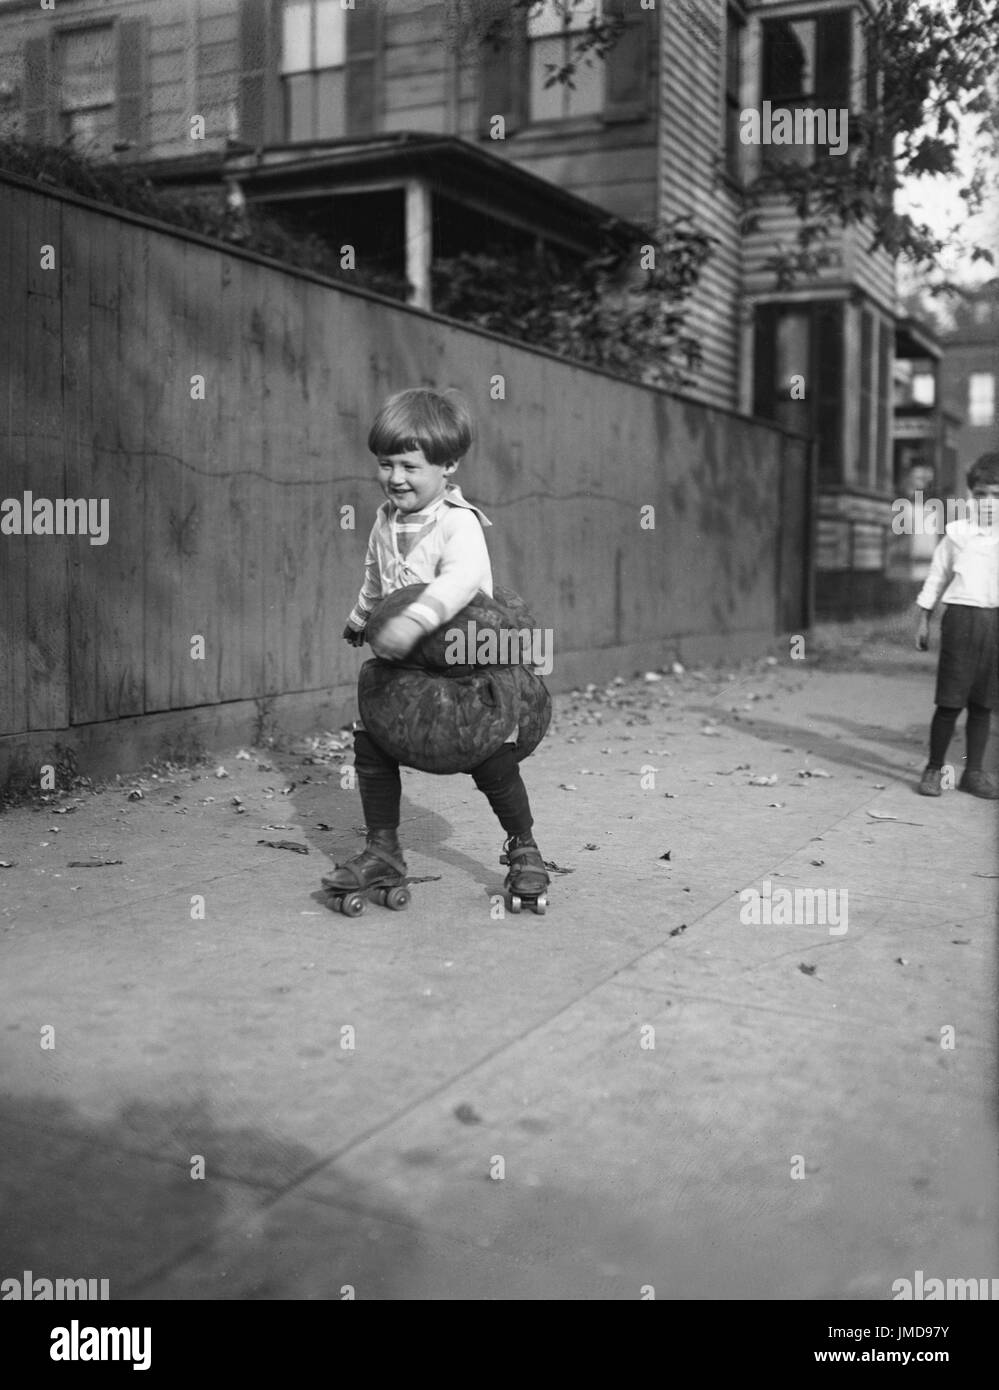 Young Boy Rollerskating with Pillows, Harris & Ewing, 1924 Stock Photo